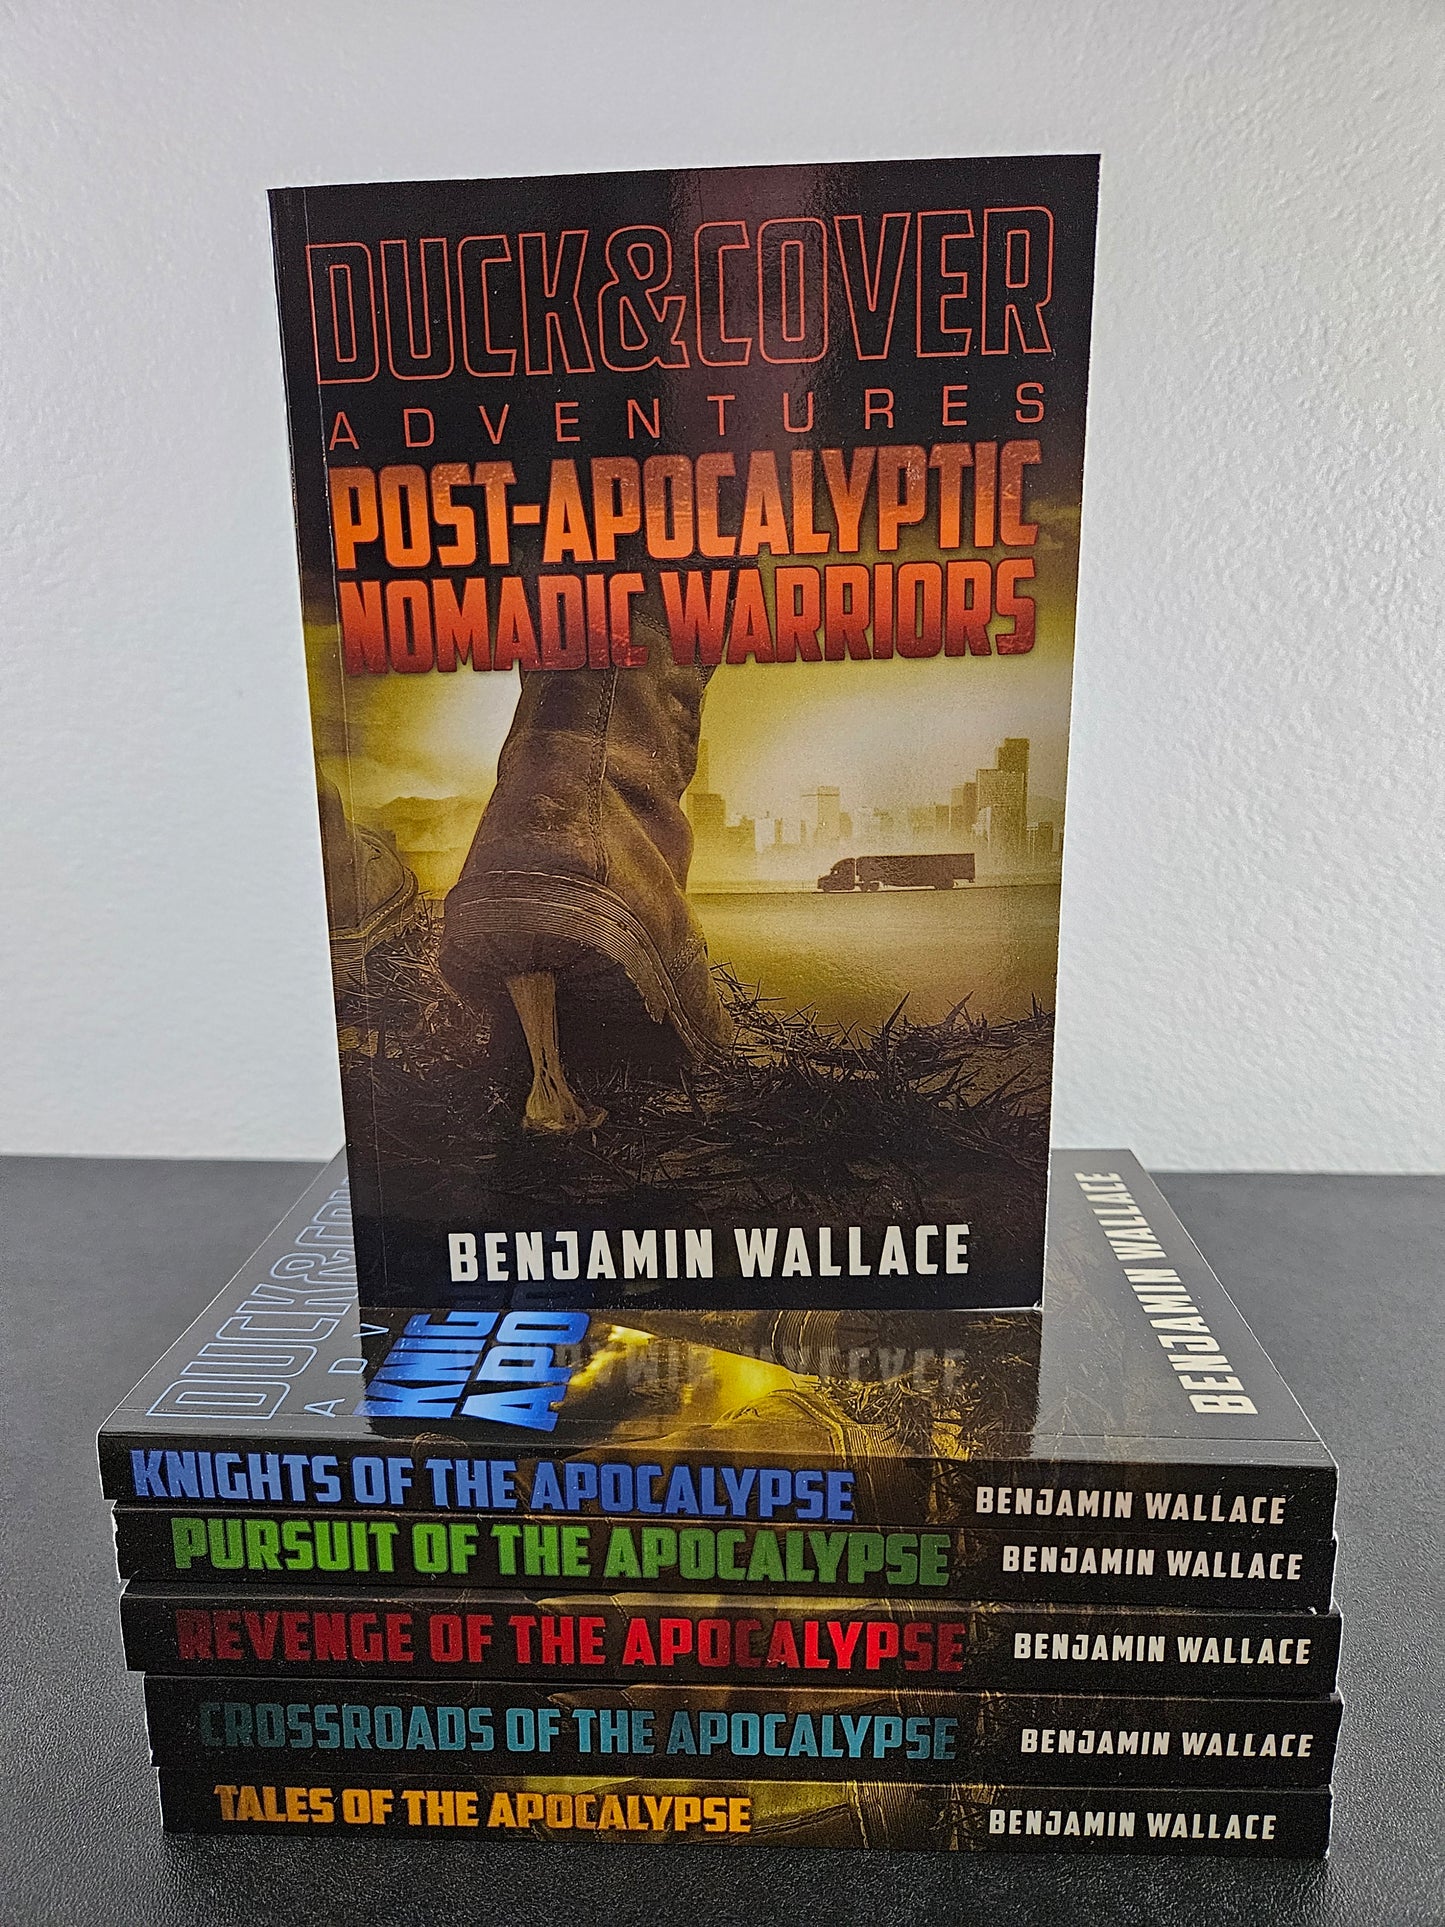 Knights of the Apocalypse: Duck & Cover Adventures Book 2 (Signed Paperback)